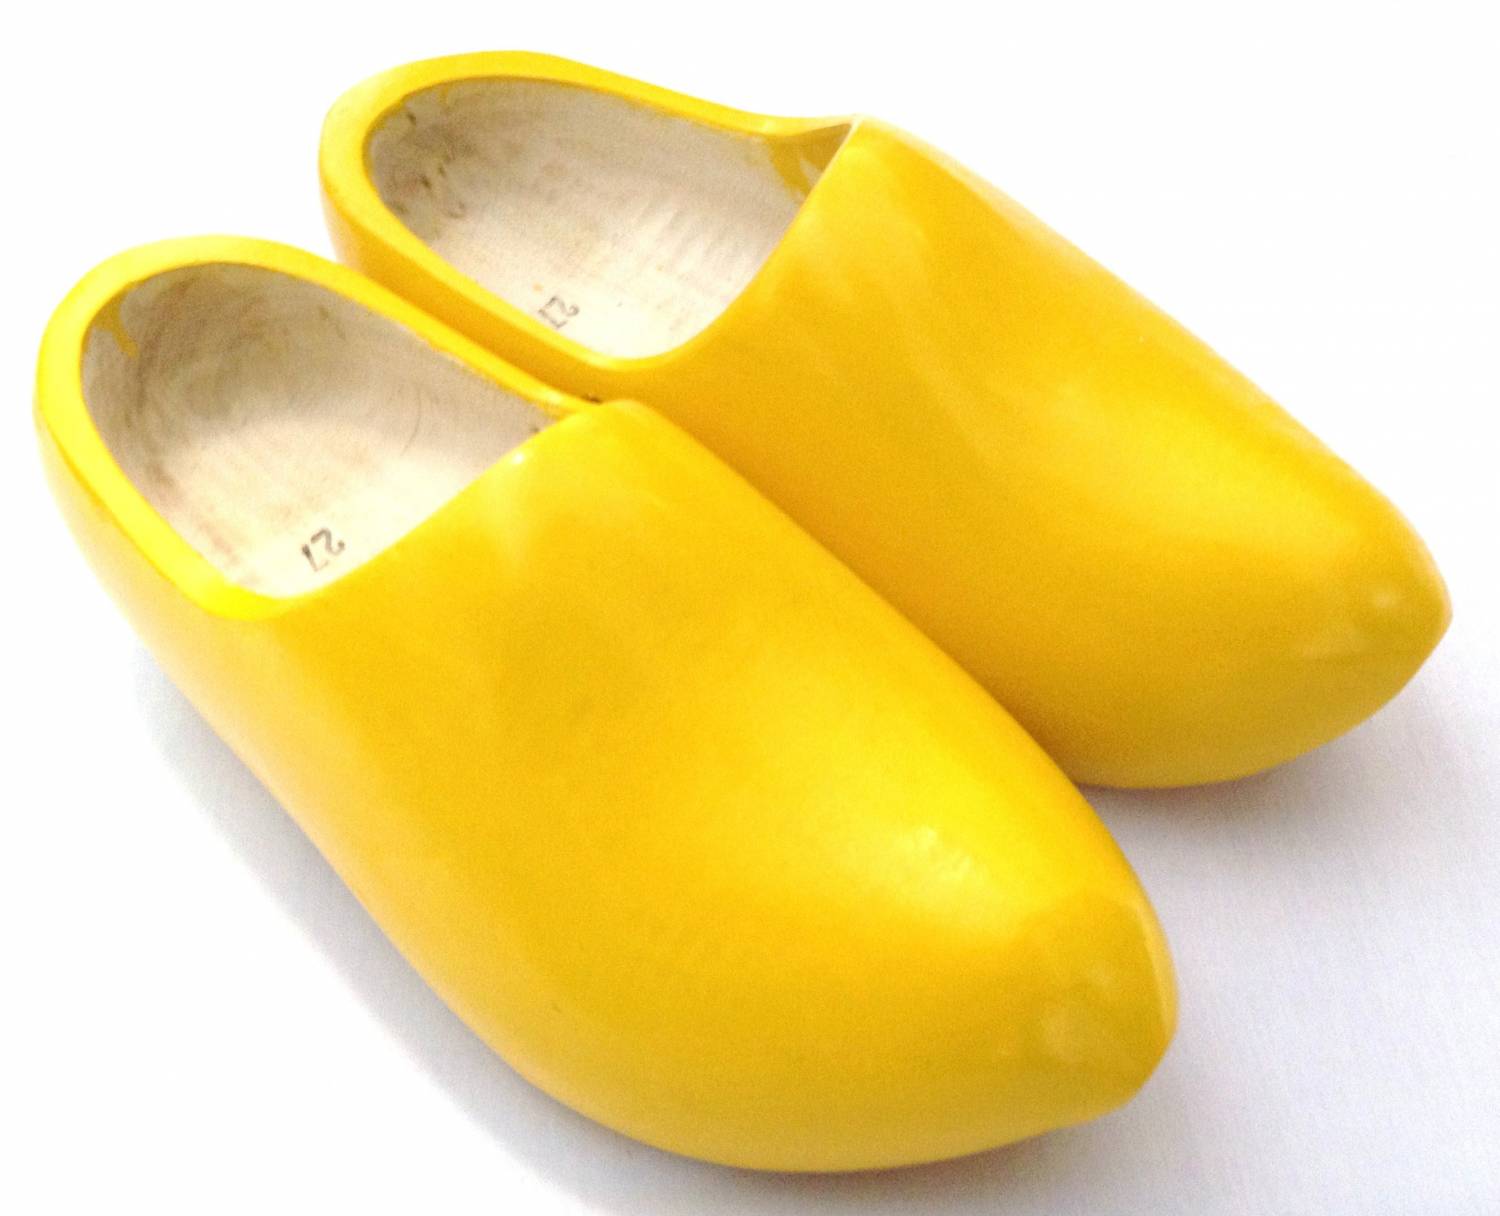 The unique appearance of yellow wooden shoes